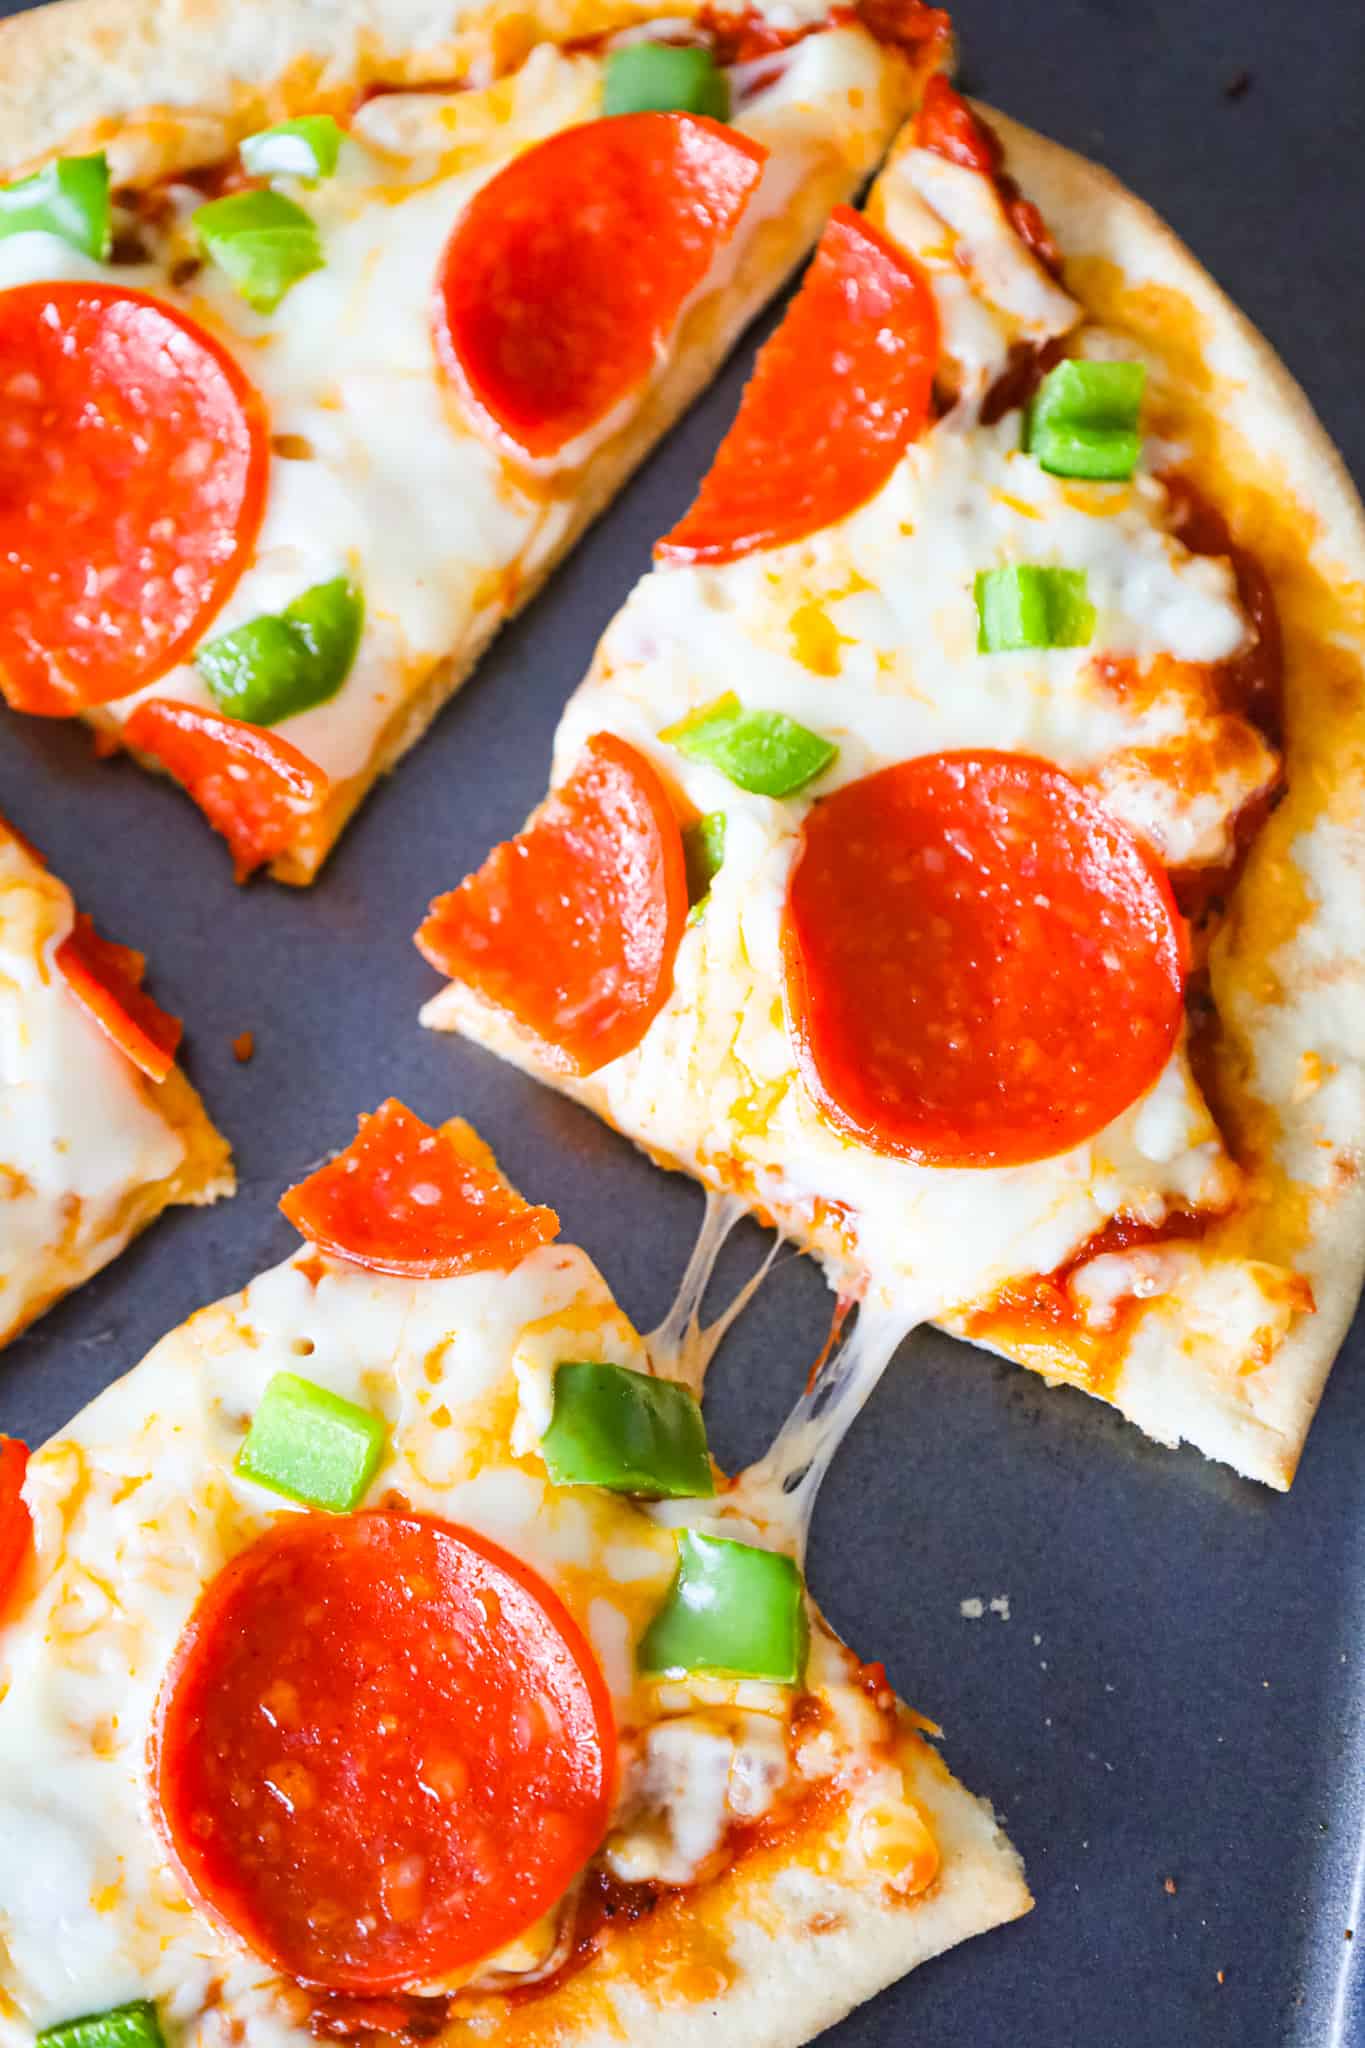 Naan Pizza is an easy dinner recipe using store bought naan bread topped with pizza sauce, shredded mozzarella cheese, sliced pepperoni and diced green peppers.